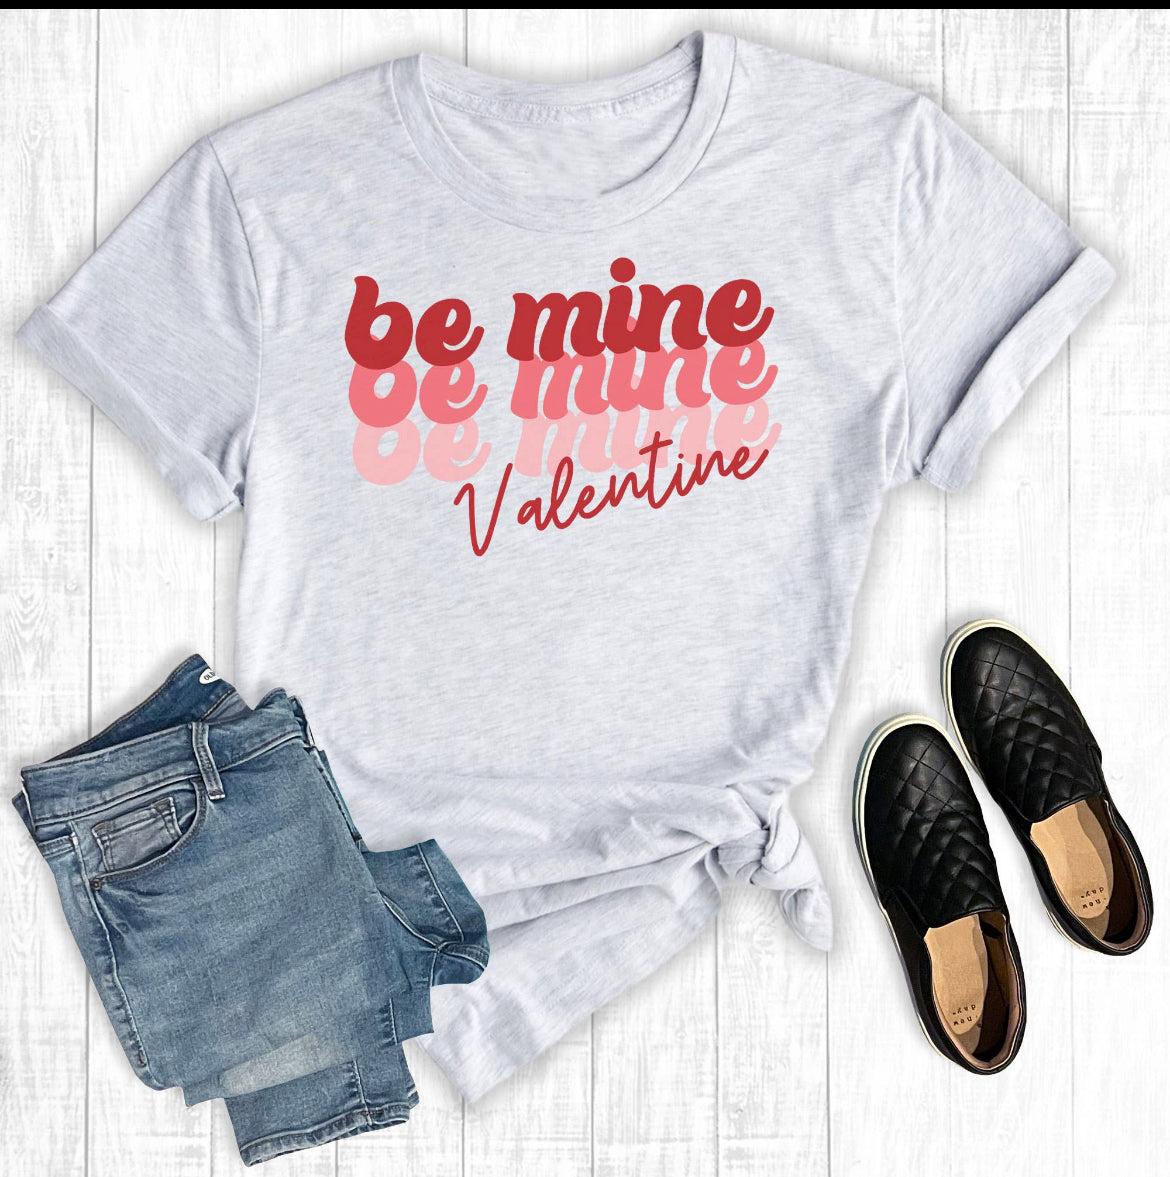 New Tee Designs : Valentine and more